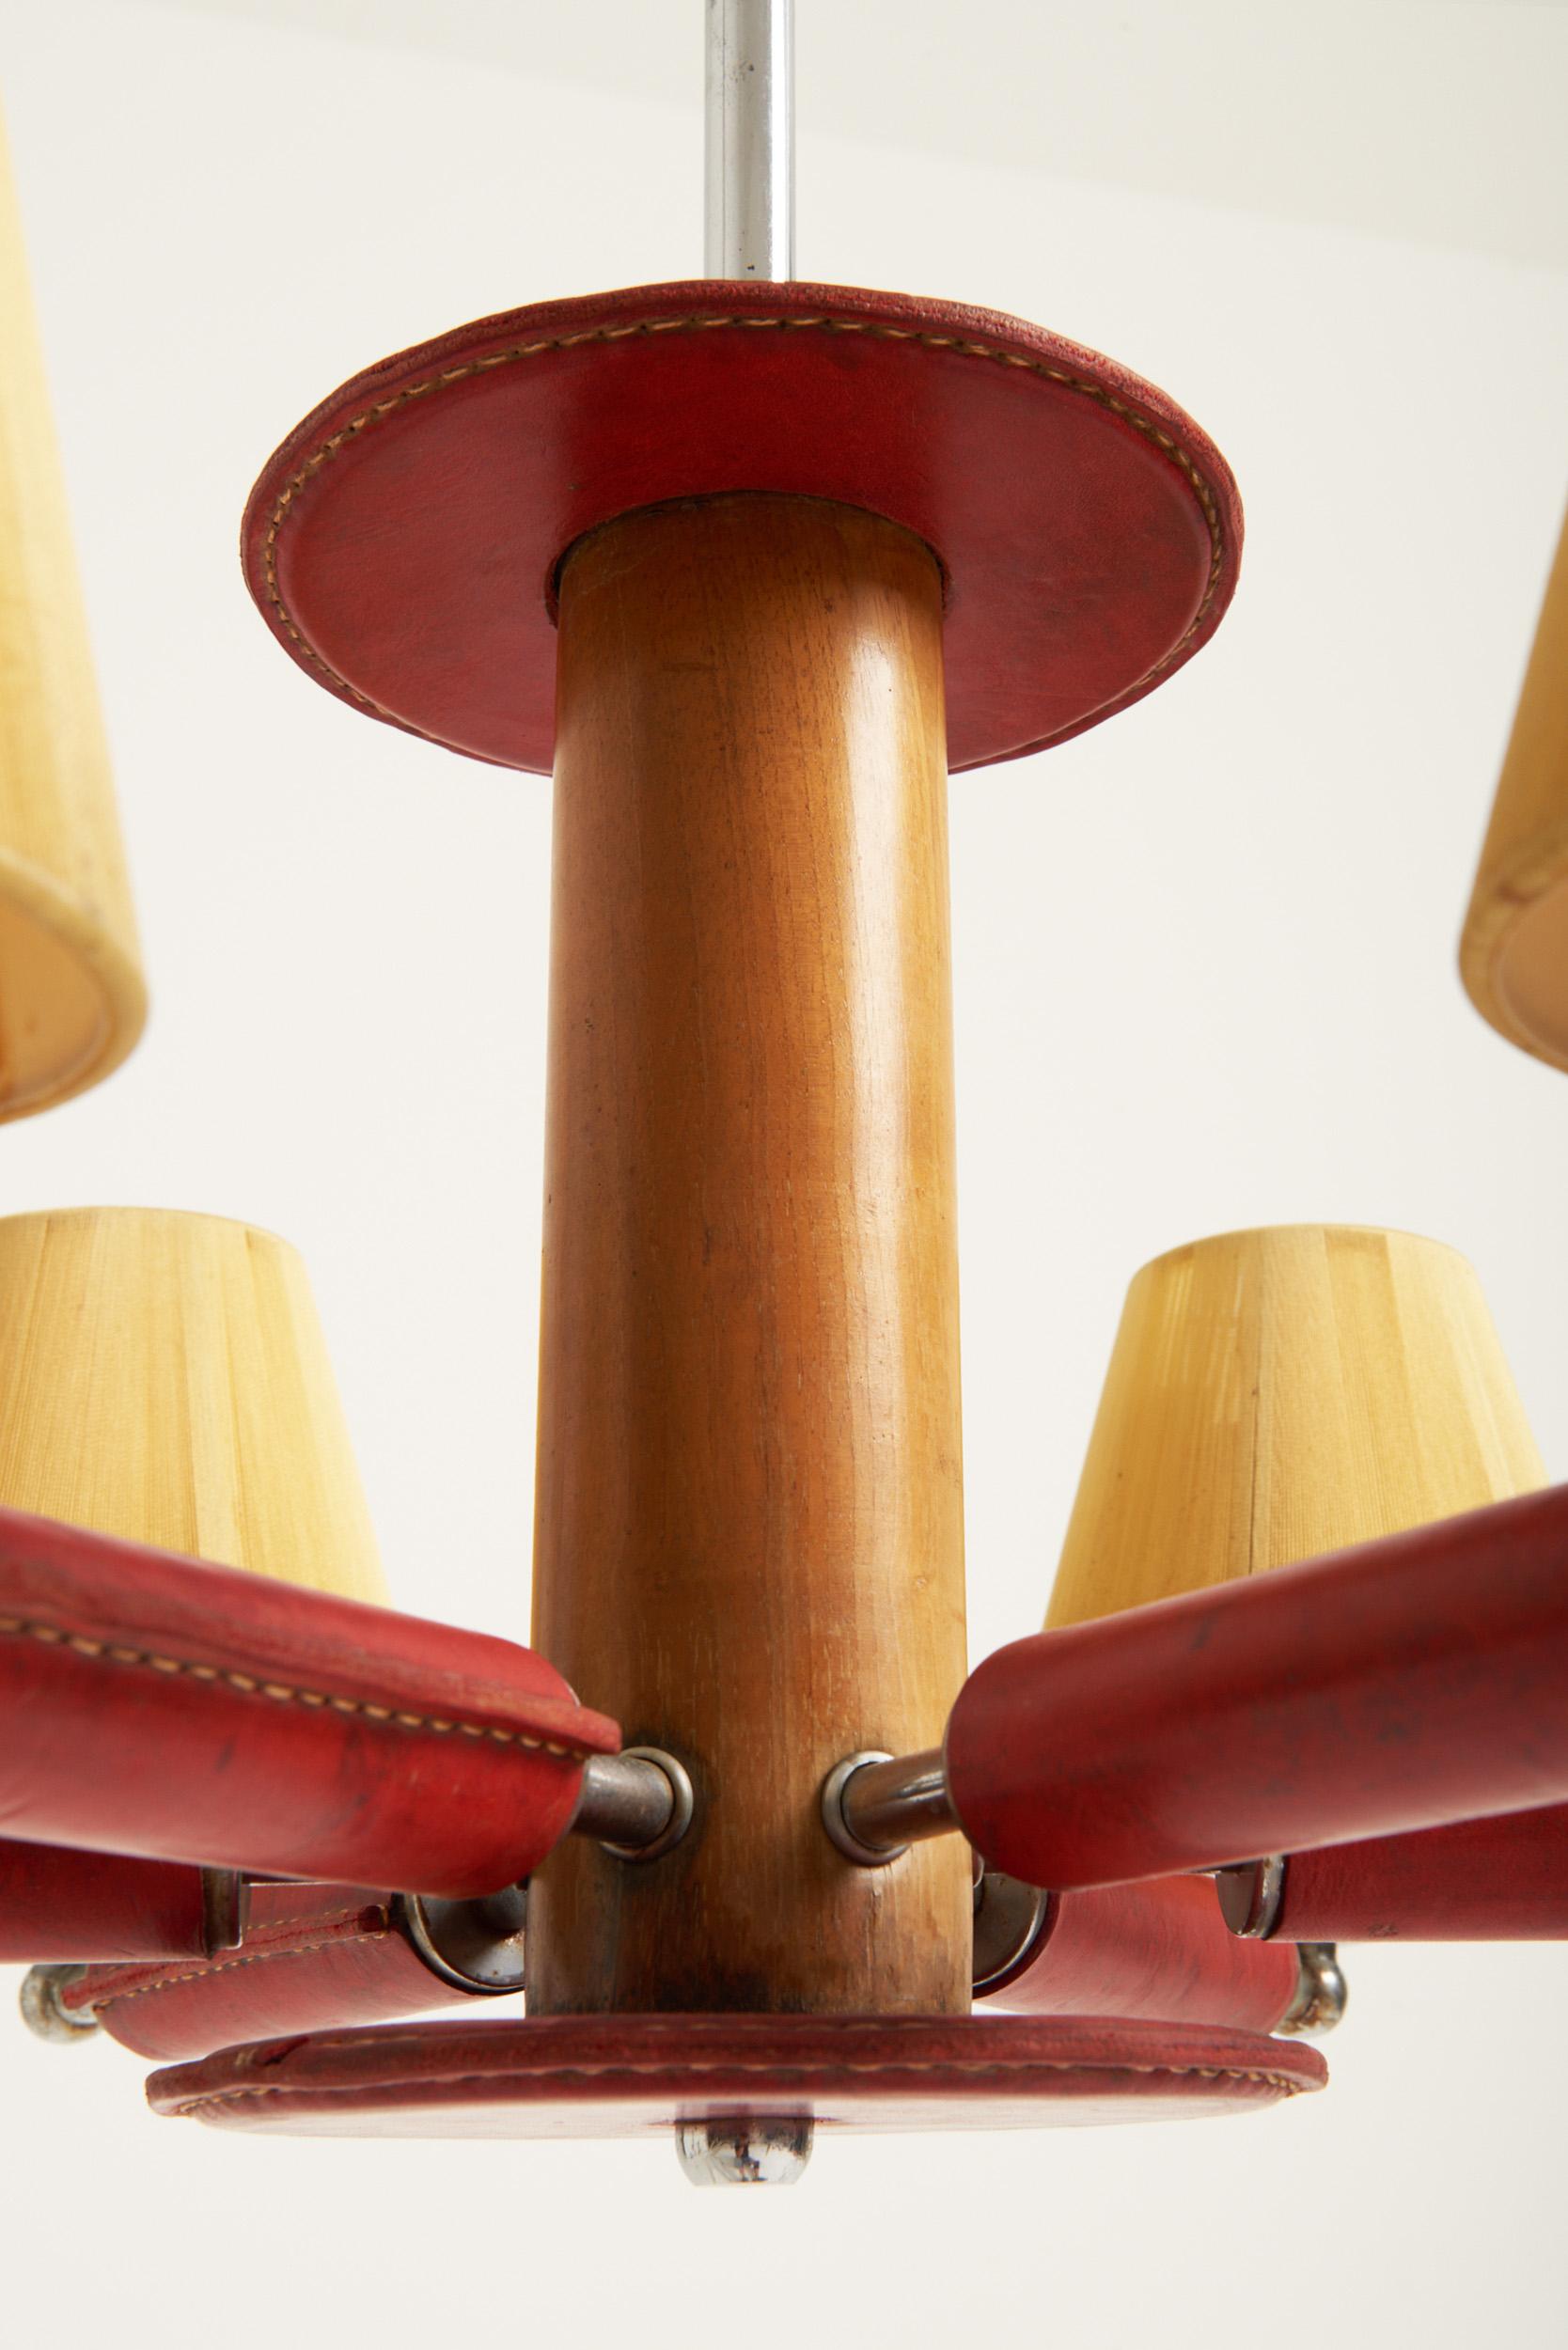 French Red Leather Ceiling Light by Jacques Adnet (1900-1984)